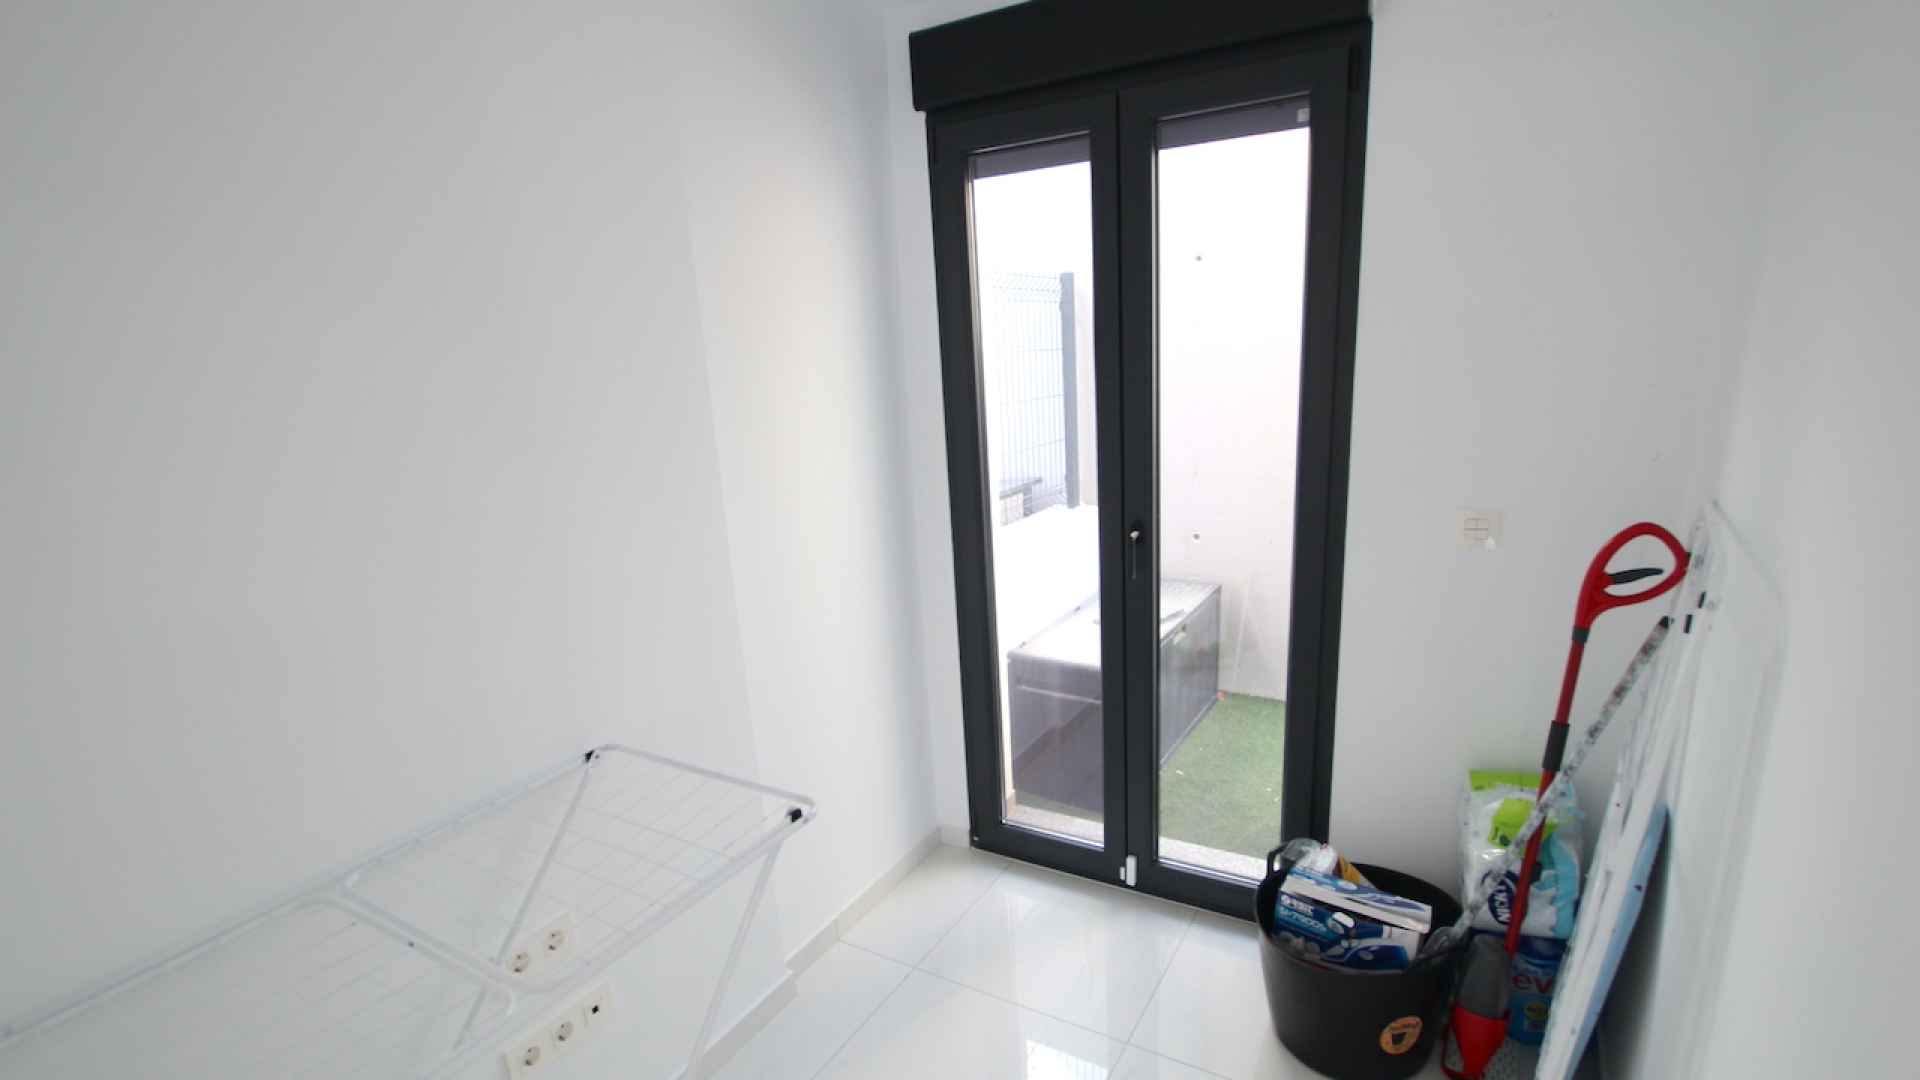 48308_stunning_3_bedroom_villa_in_a_highly_sough_after_location_201223102903_img_5078